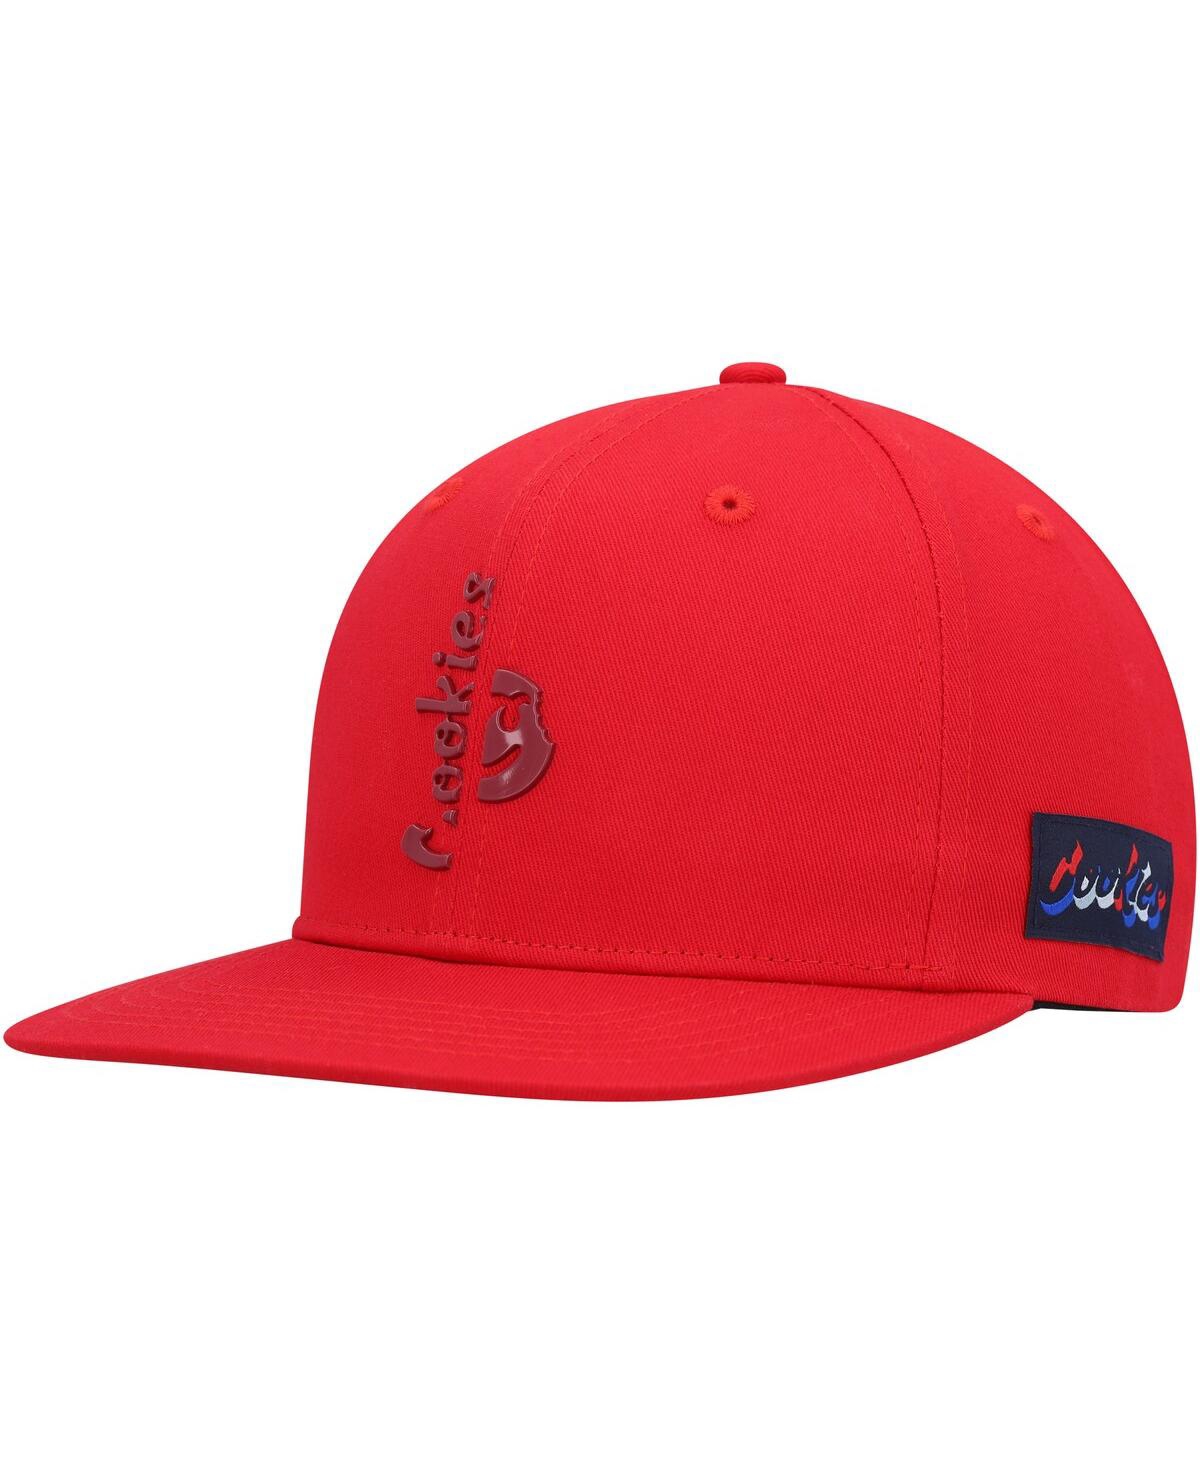 Cookies Men's  Red Searchlight Snapback Hat